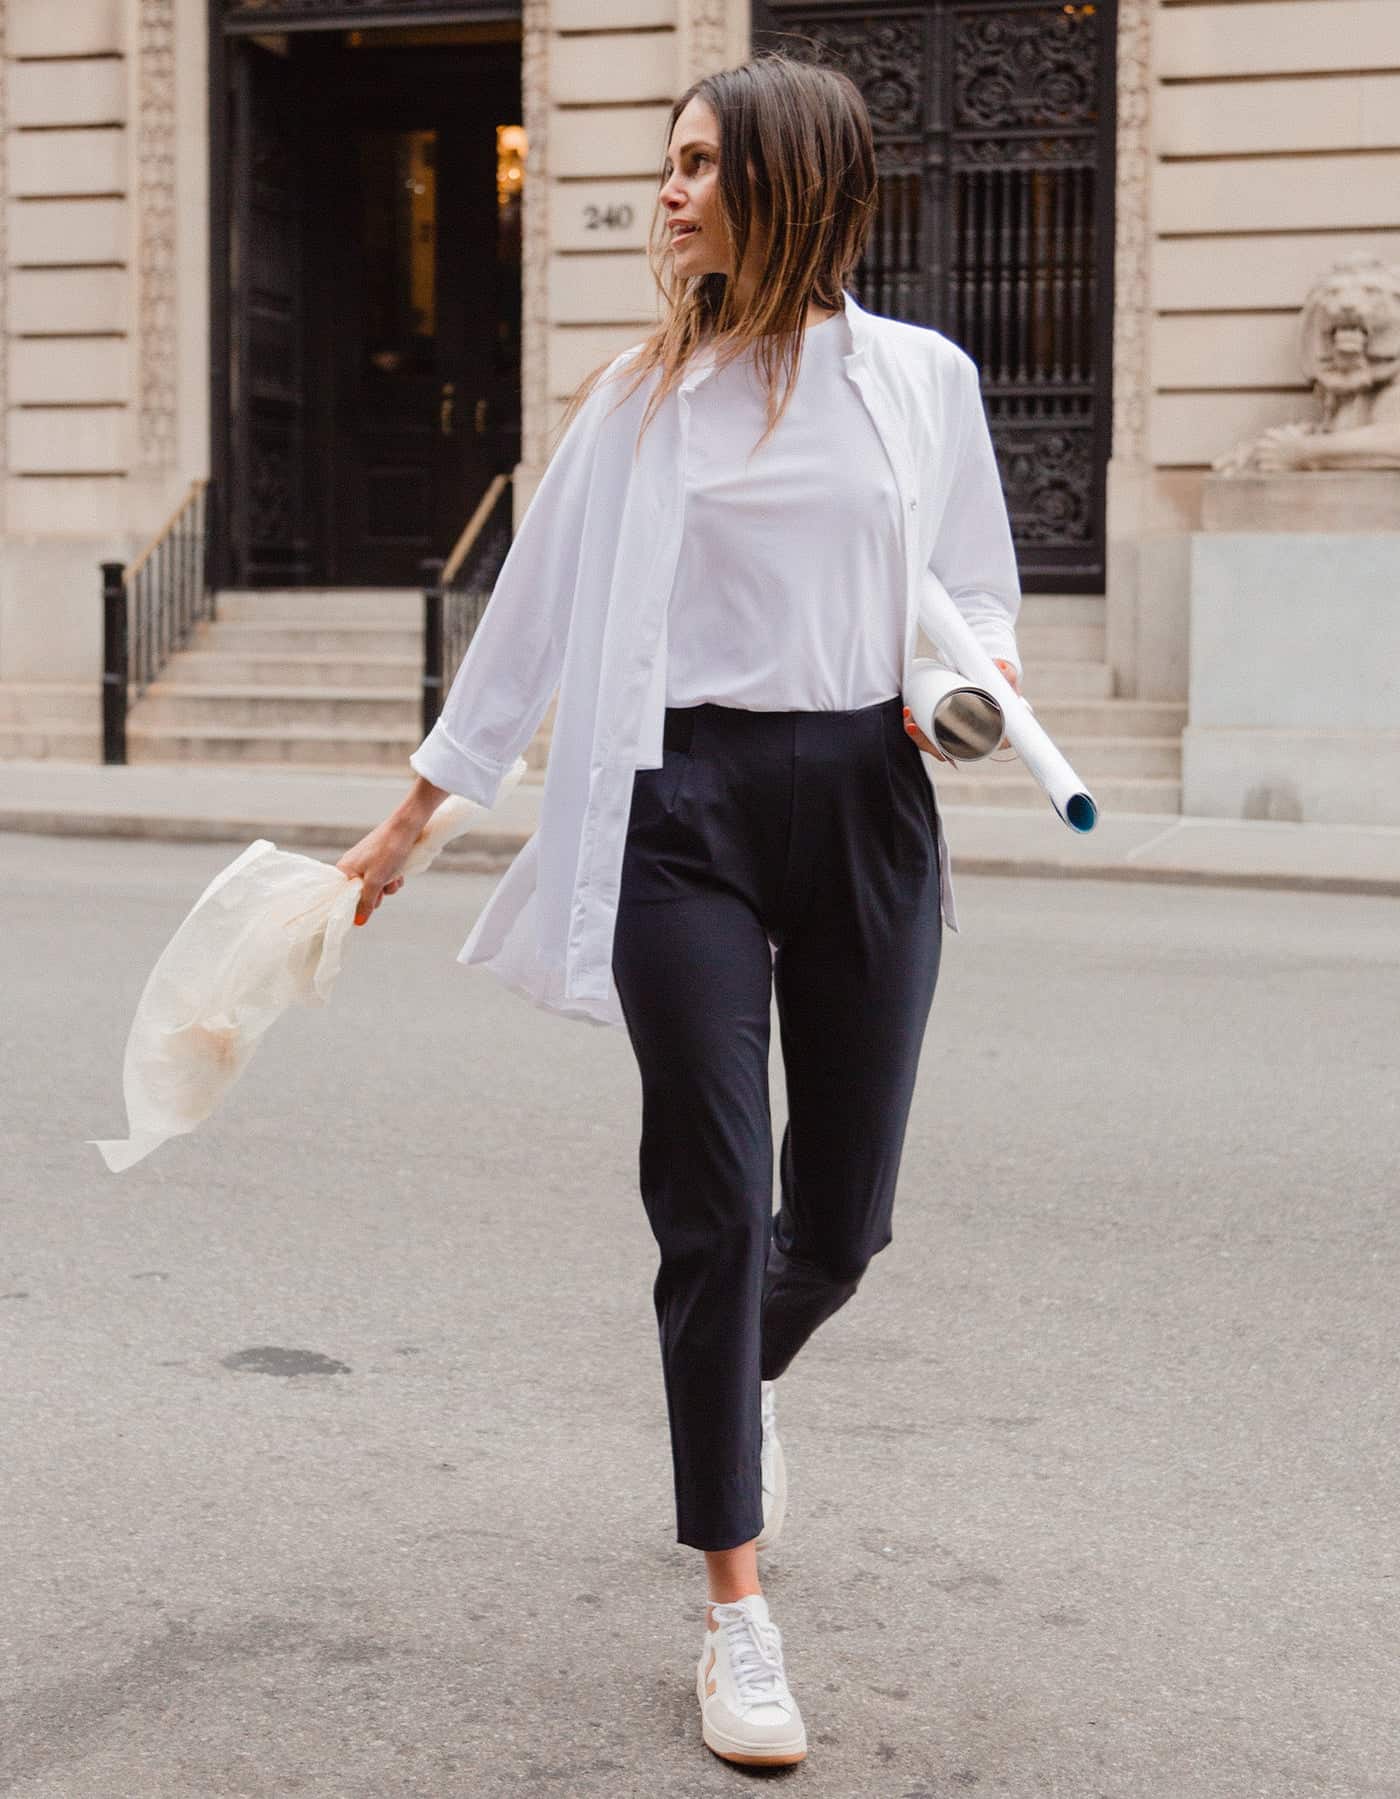 image of a woman crossing the street in a white t-shirt, white button up, navy pants, and sneakers